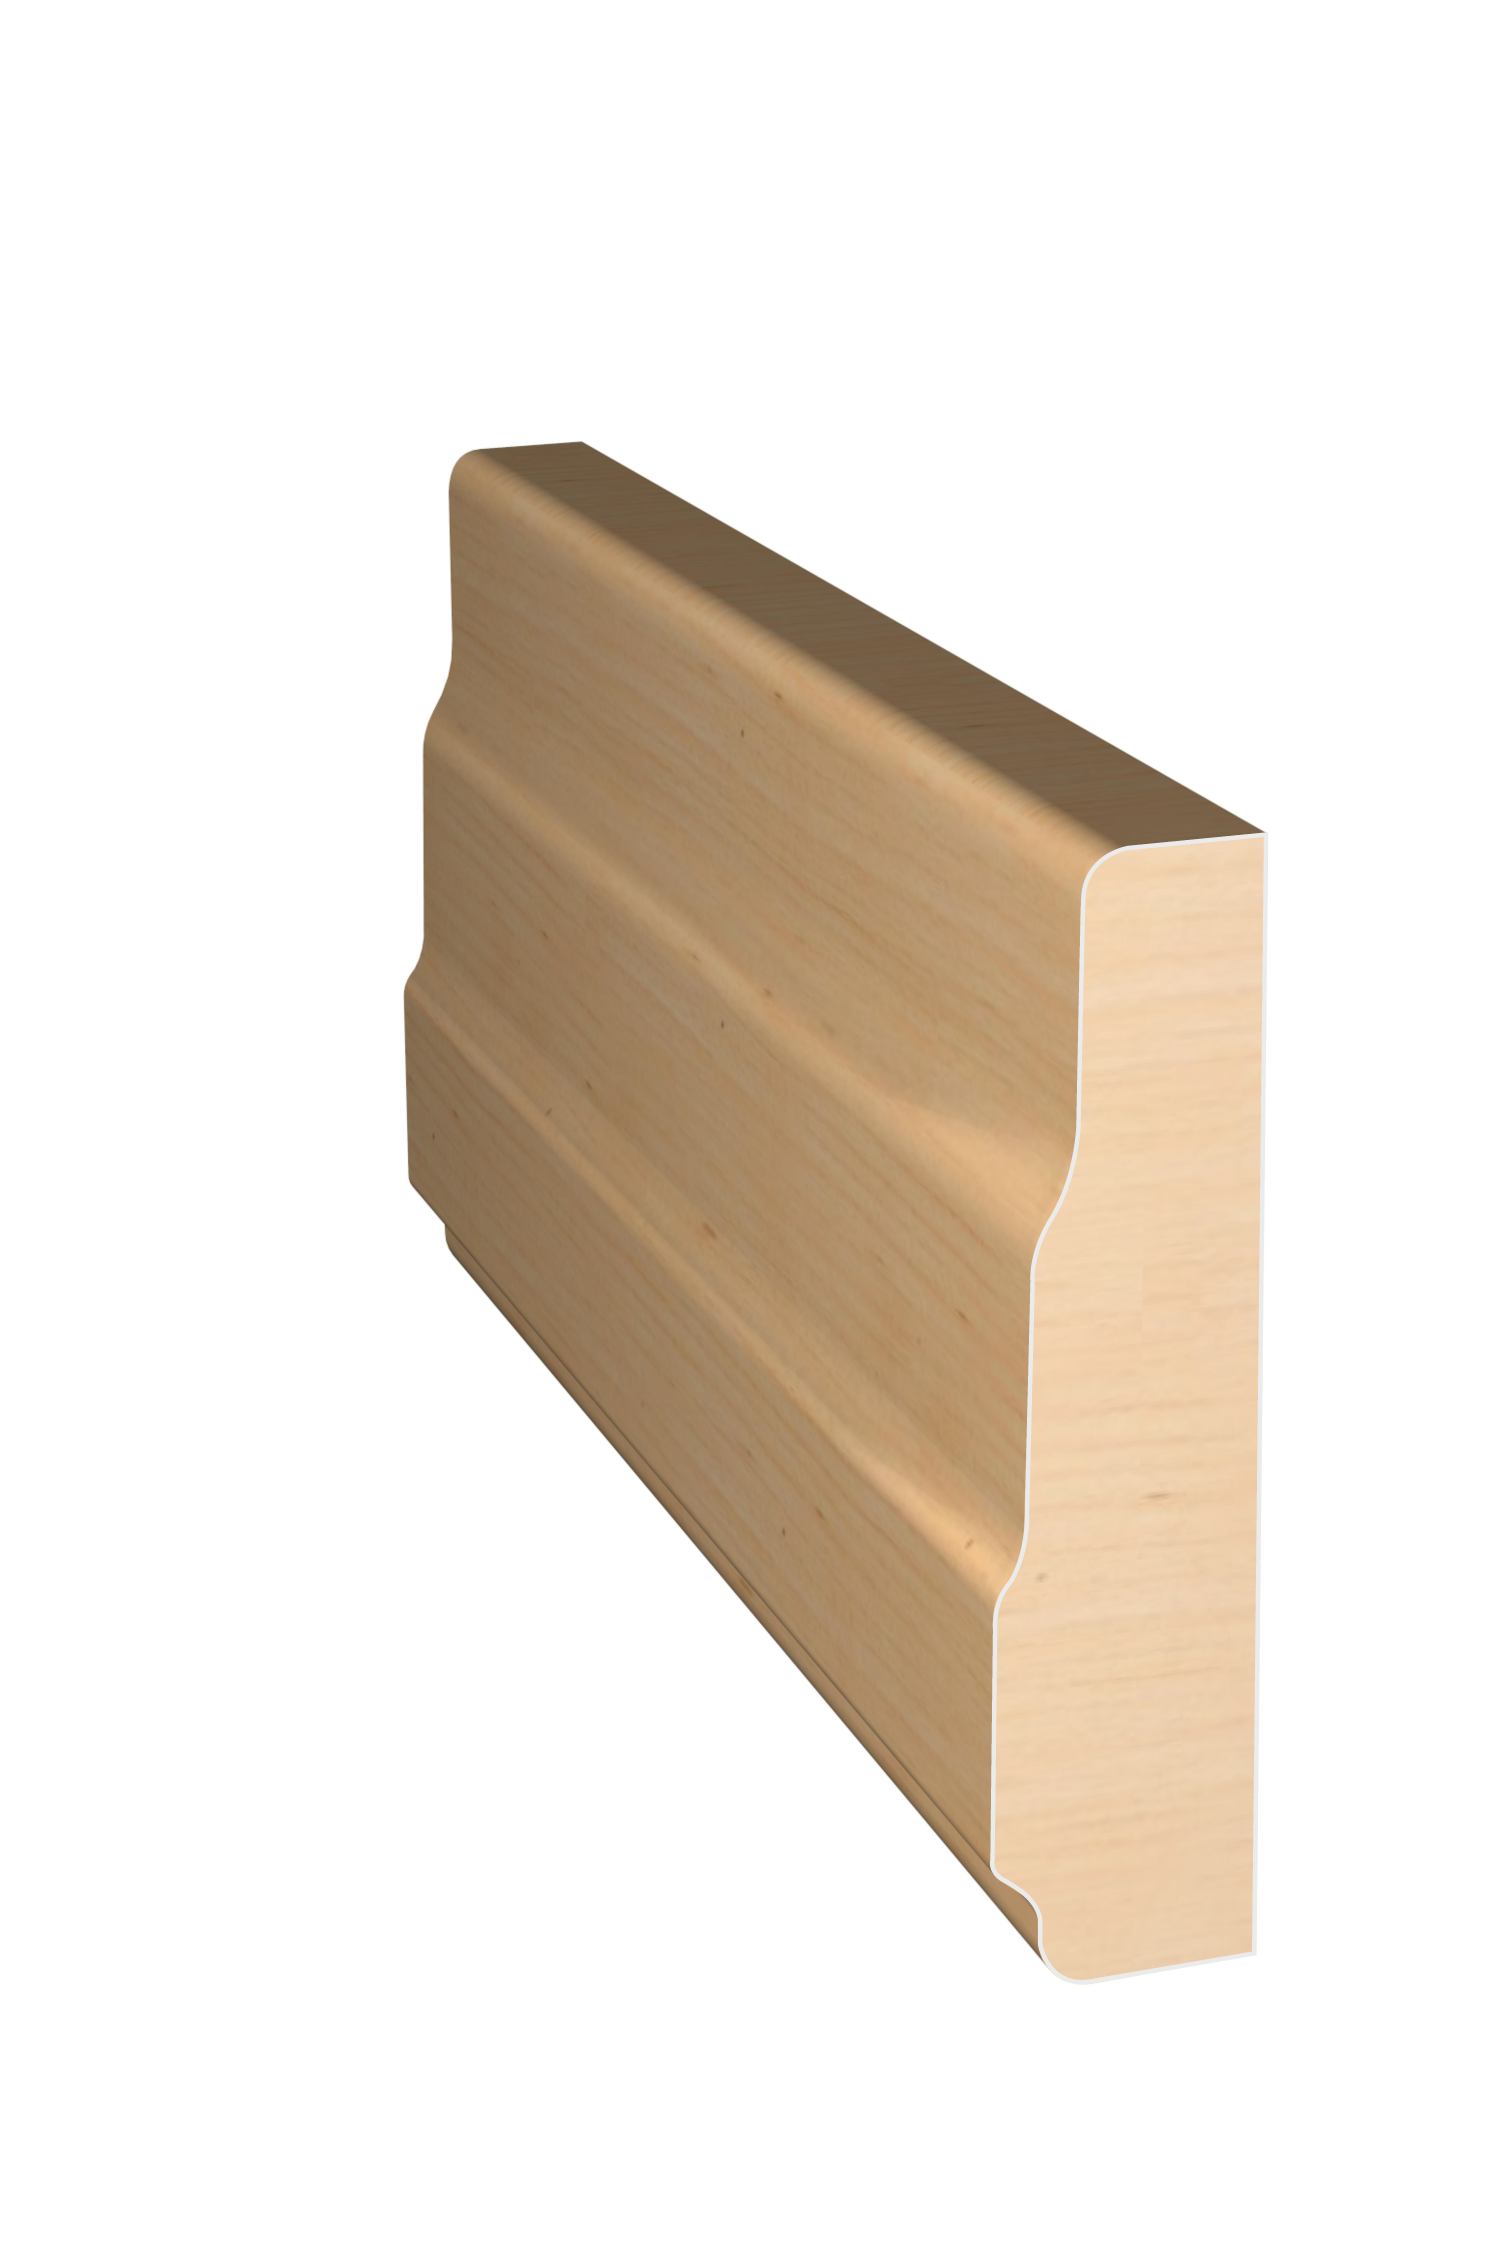 Three dimensional rendering of custom casing wood molding CAPL319 made by Public Lumber Company in Detroit.